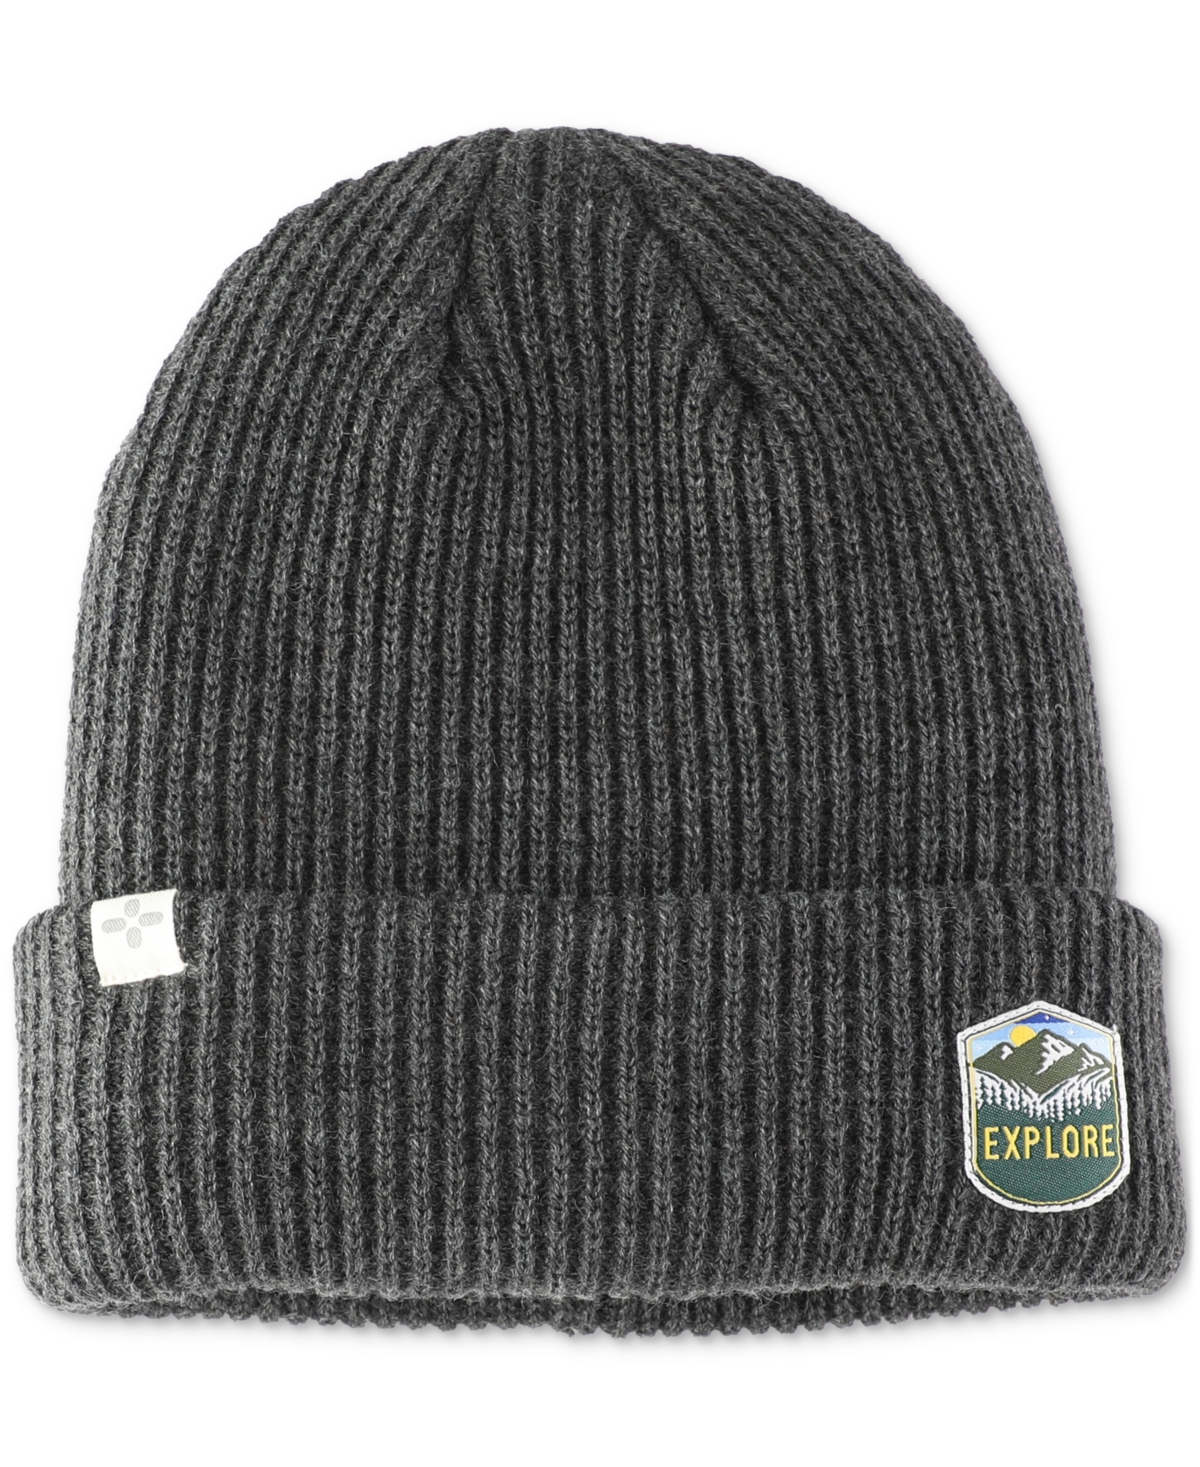 Men's Explore Patch Logo Hat, Created for Macy's - Charcoal